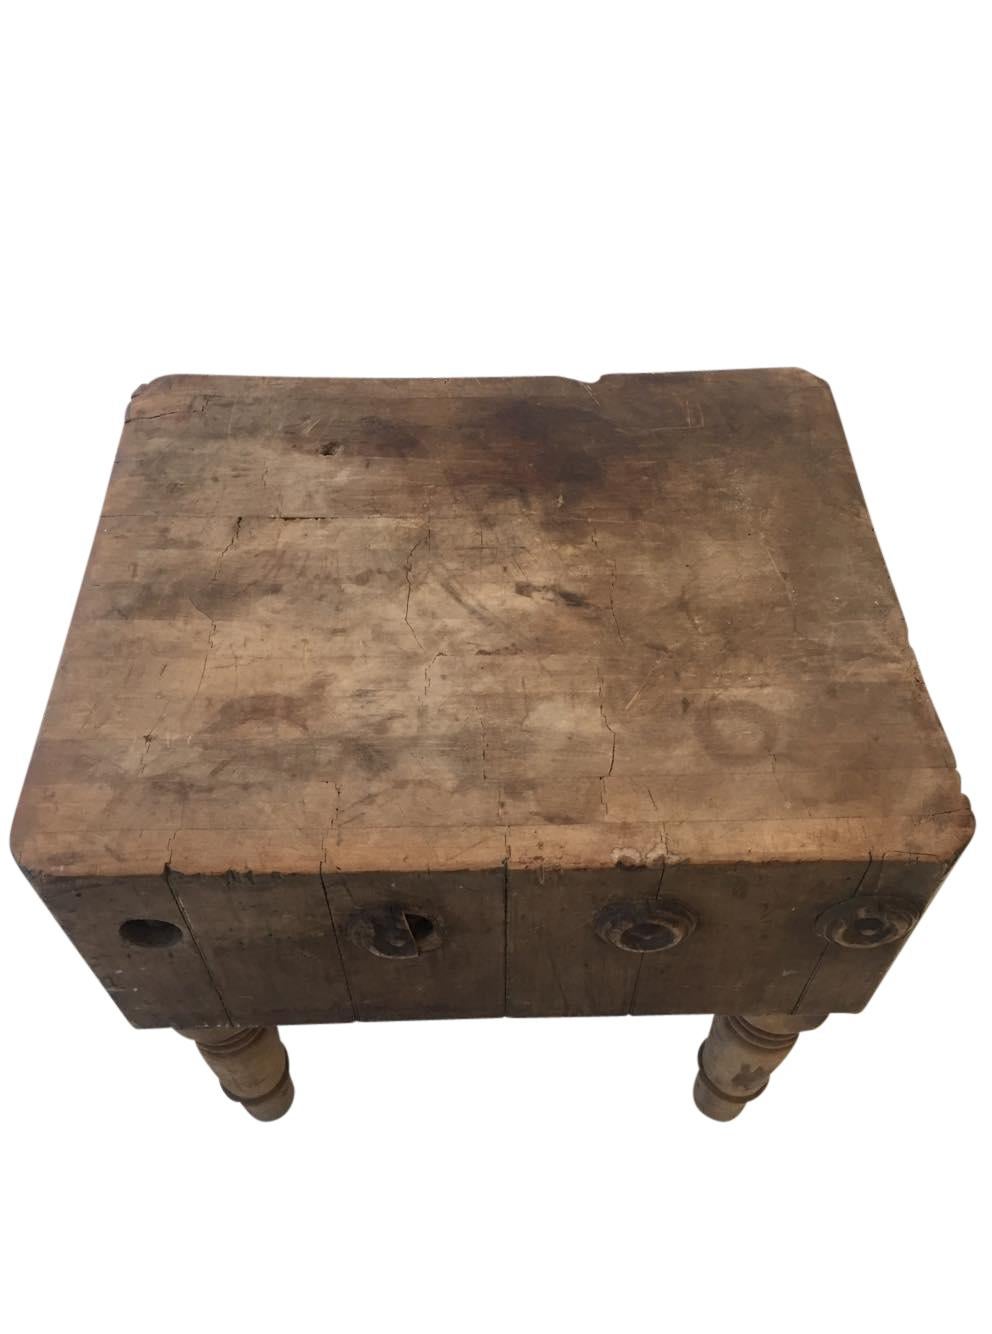 Robust authentic antique chopping block from the early 20th century. Salvaged North American kitchen accessory from market butcher in the northern midwest. Heavy duty maple with original tapered turned legs and markings.